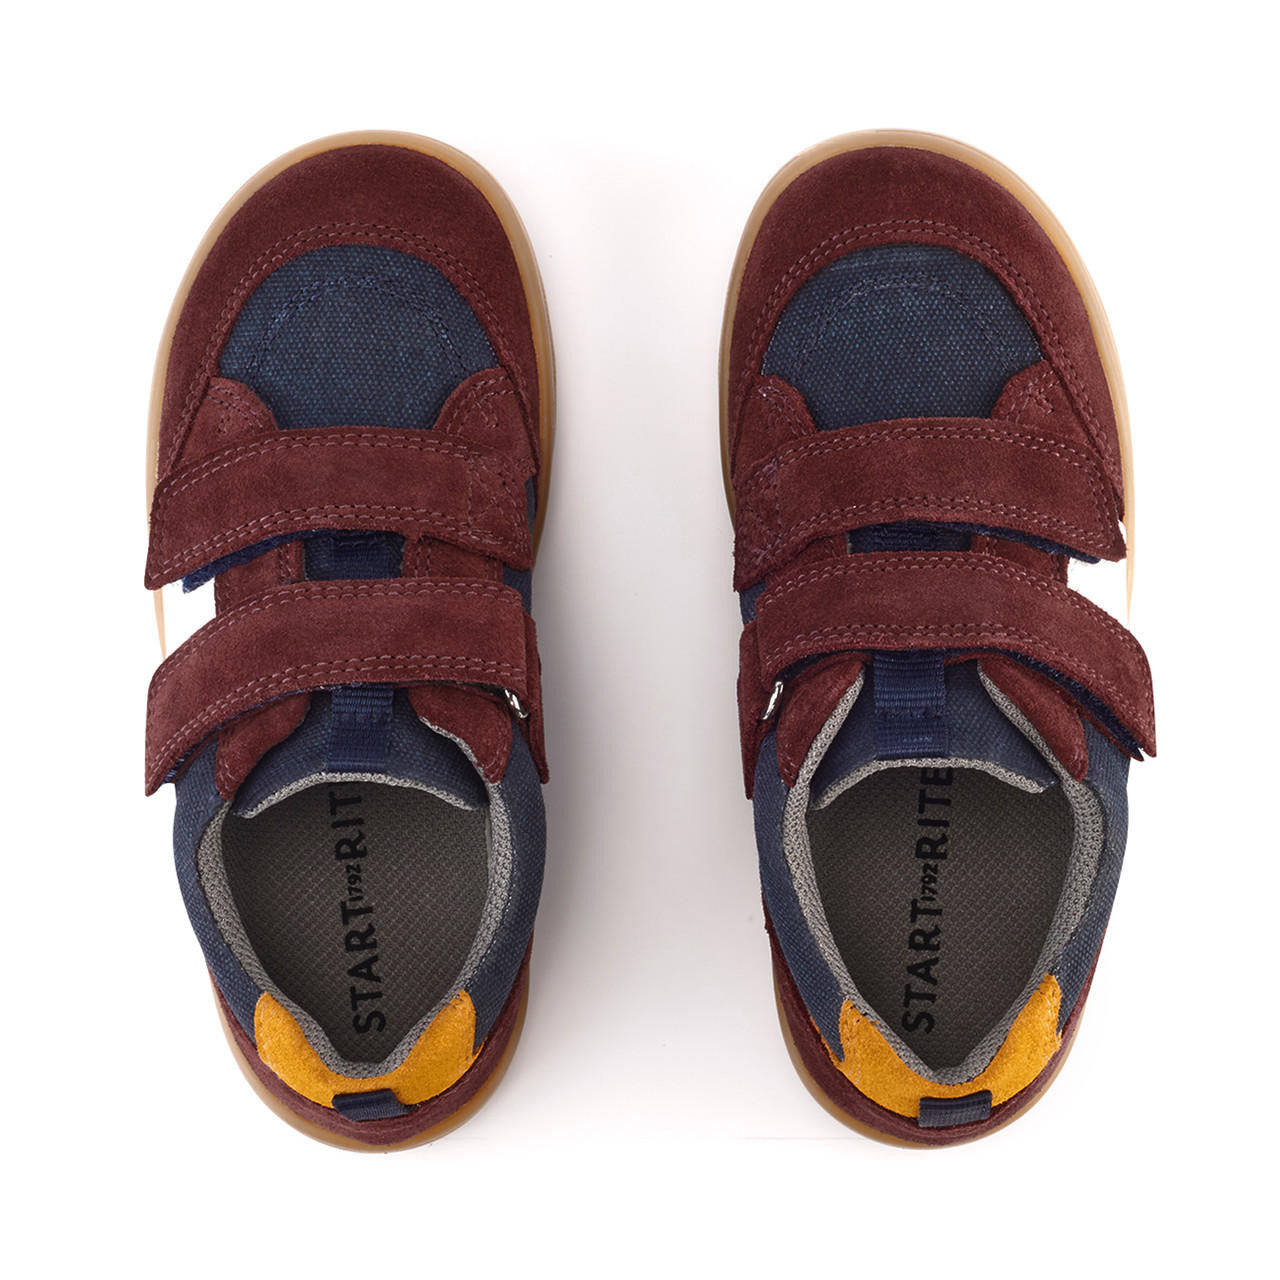 A boys casual shoe by Start-Rite, style is Enigma in wine and navy suede and canvas with double velcro fastening. Top view of a pair.